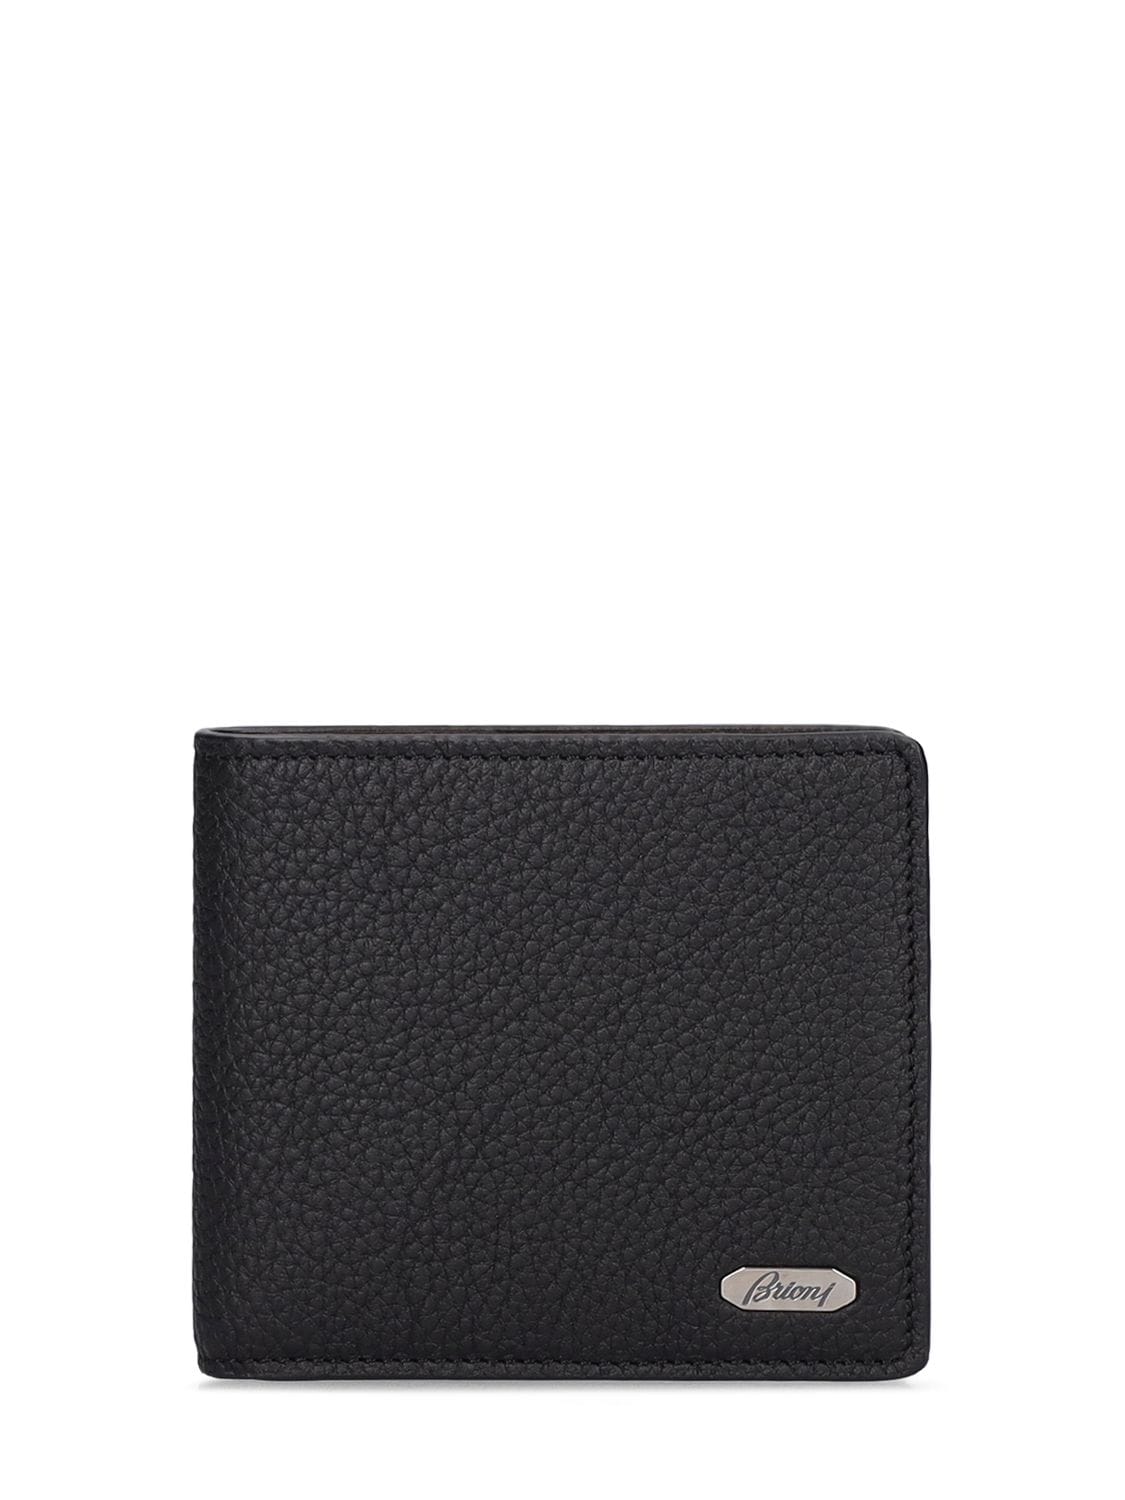 Brioni Bifold Leather Wallet In Black